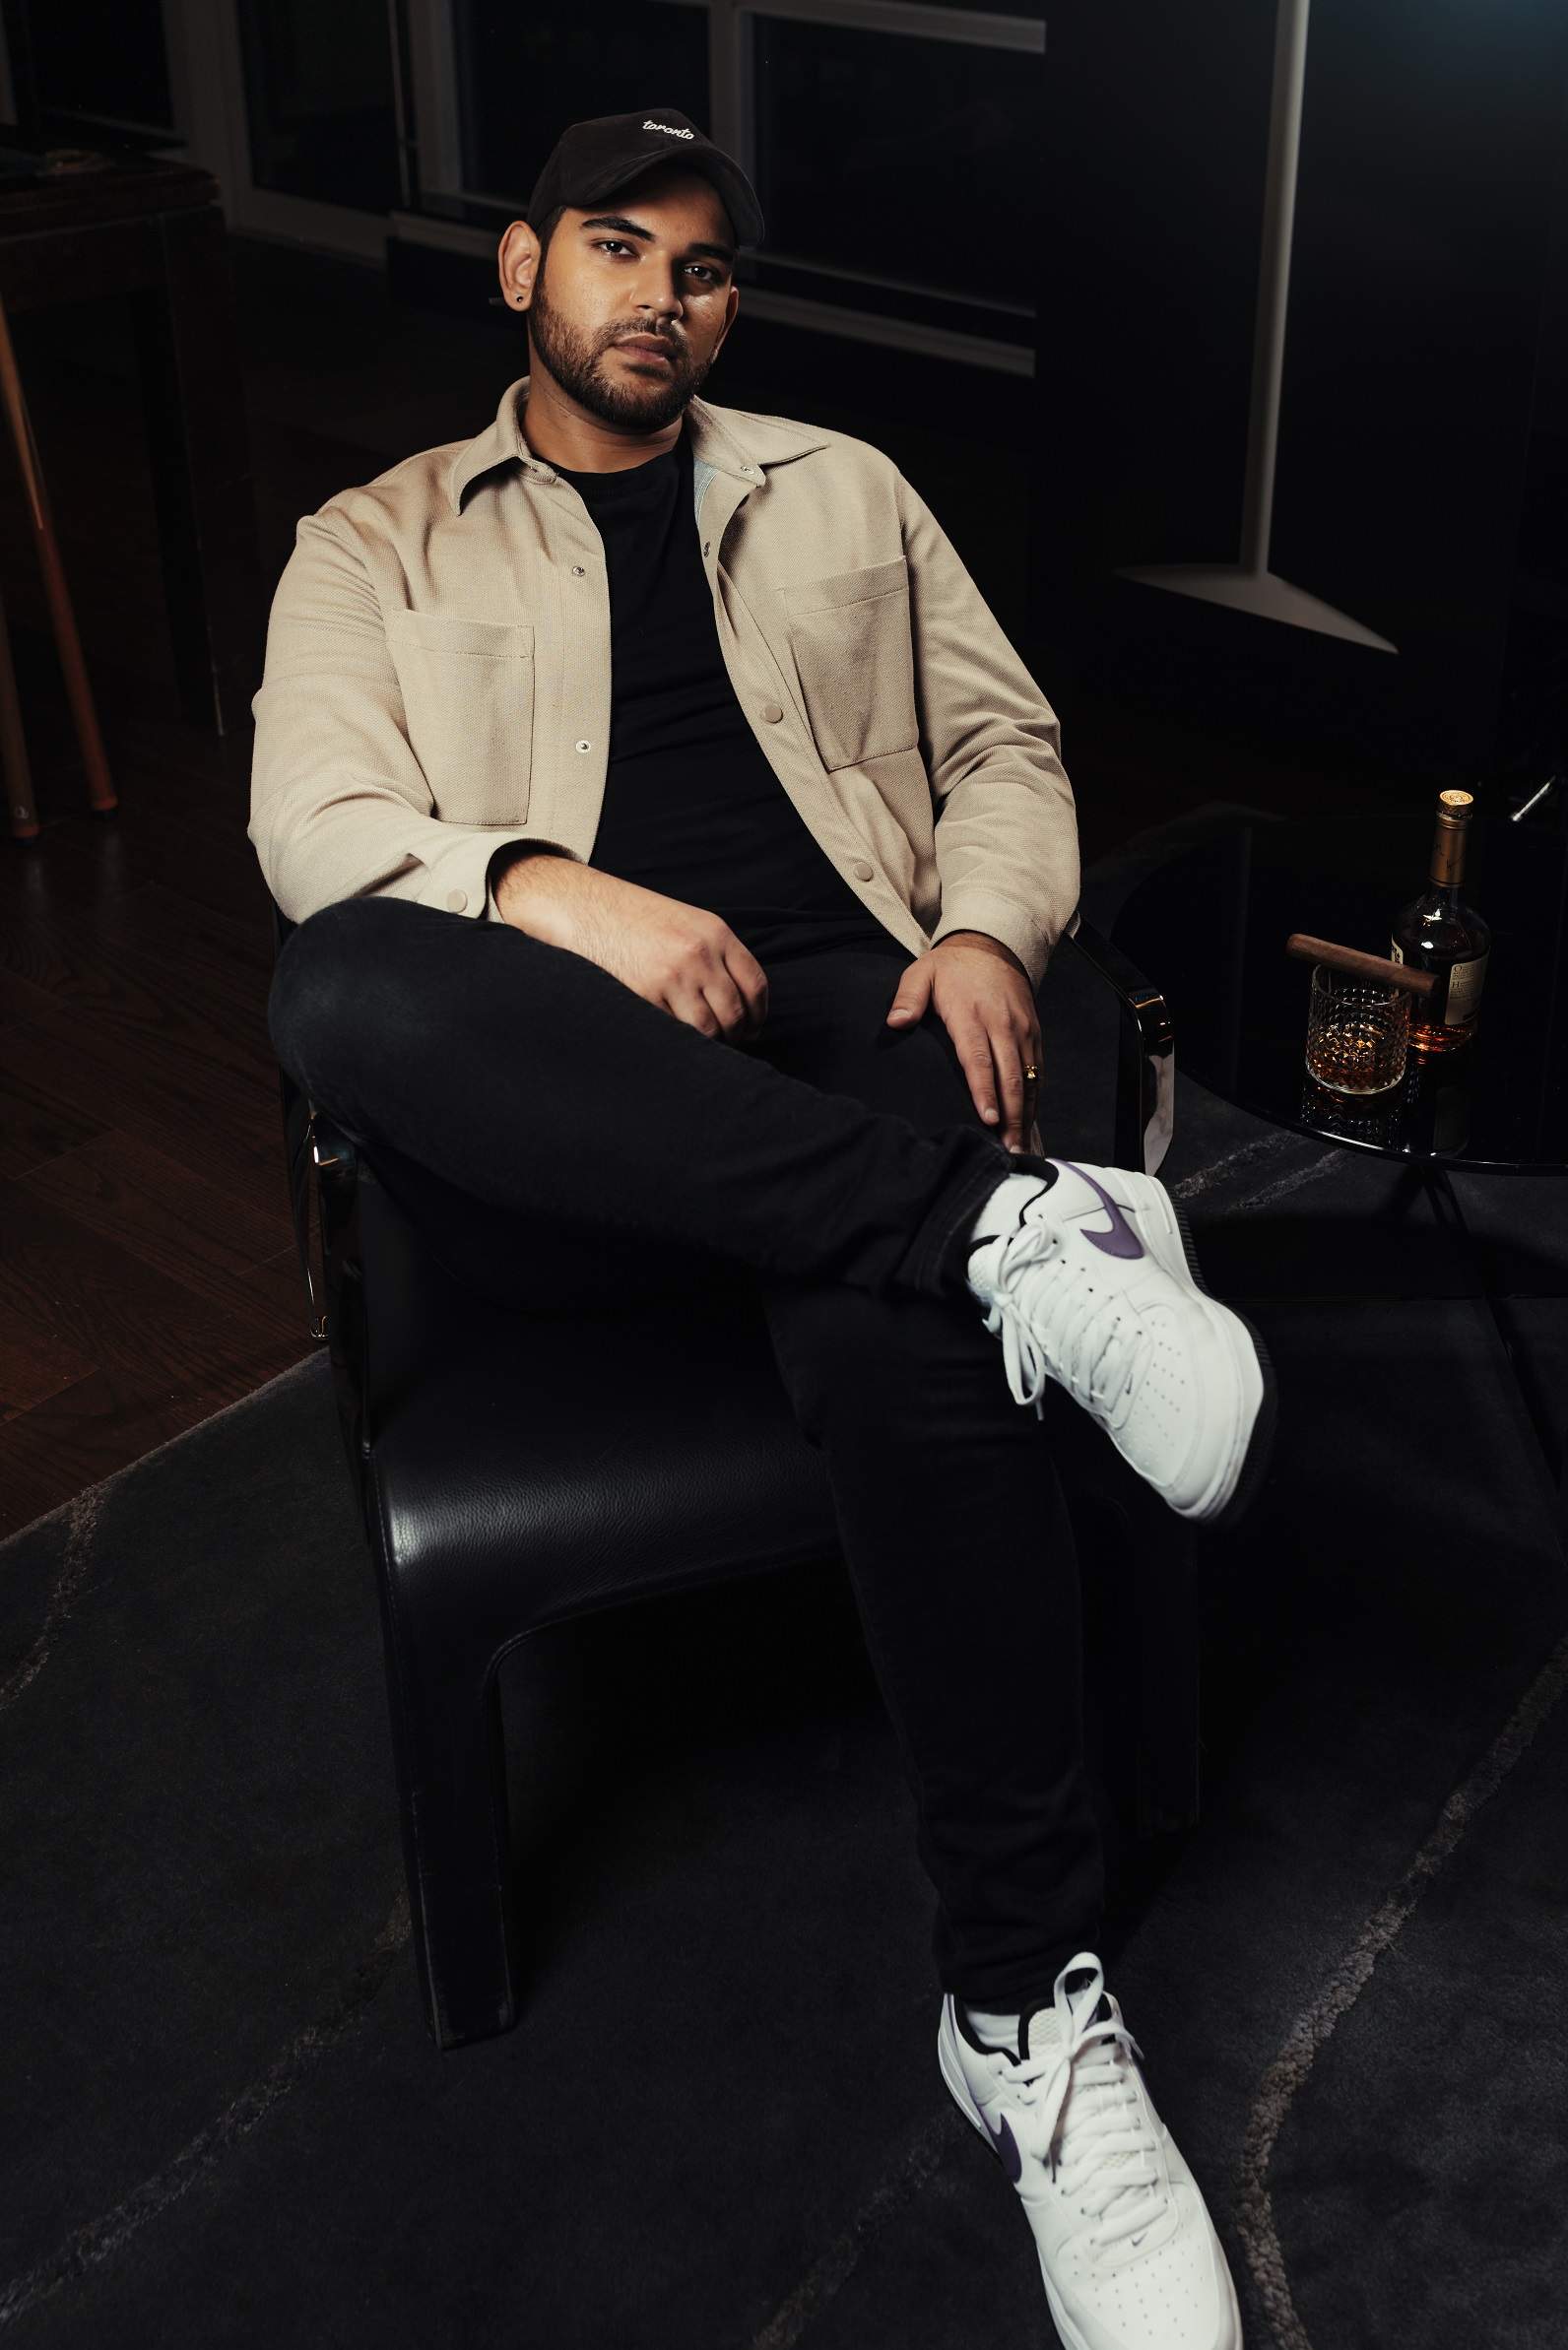 Producer Sahil Mirchandani Celebrates Nike’s 50th Anniversary with “Never Done” Campaign